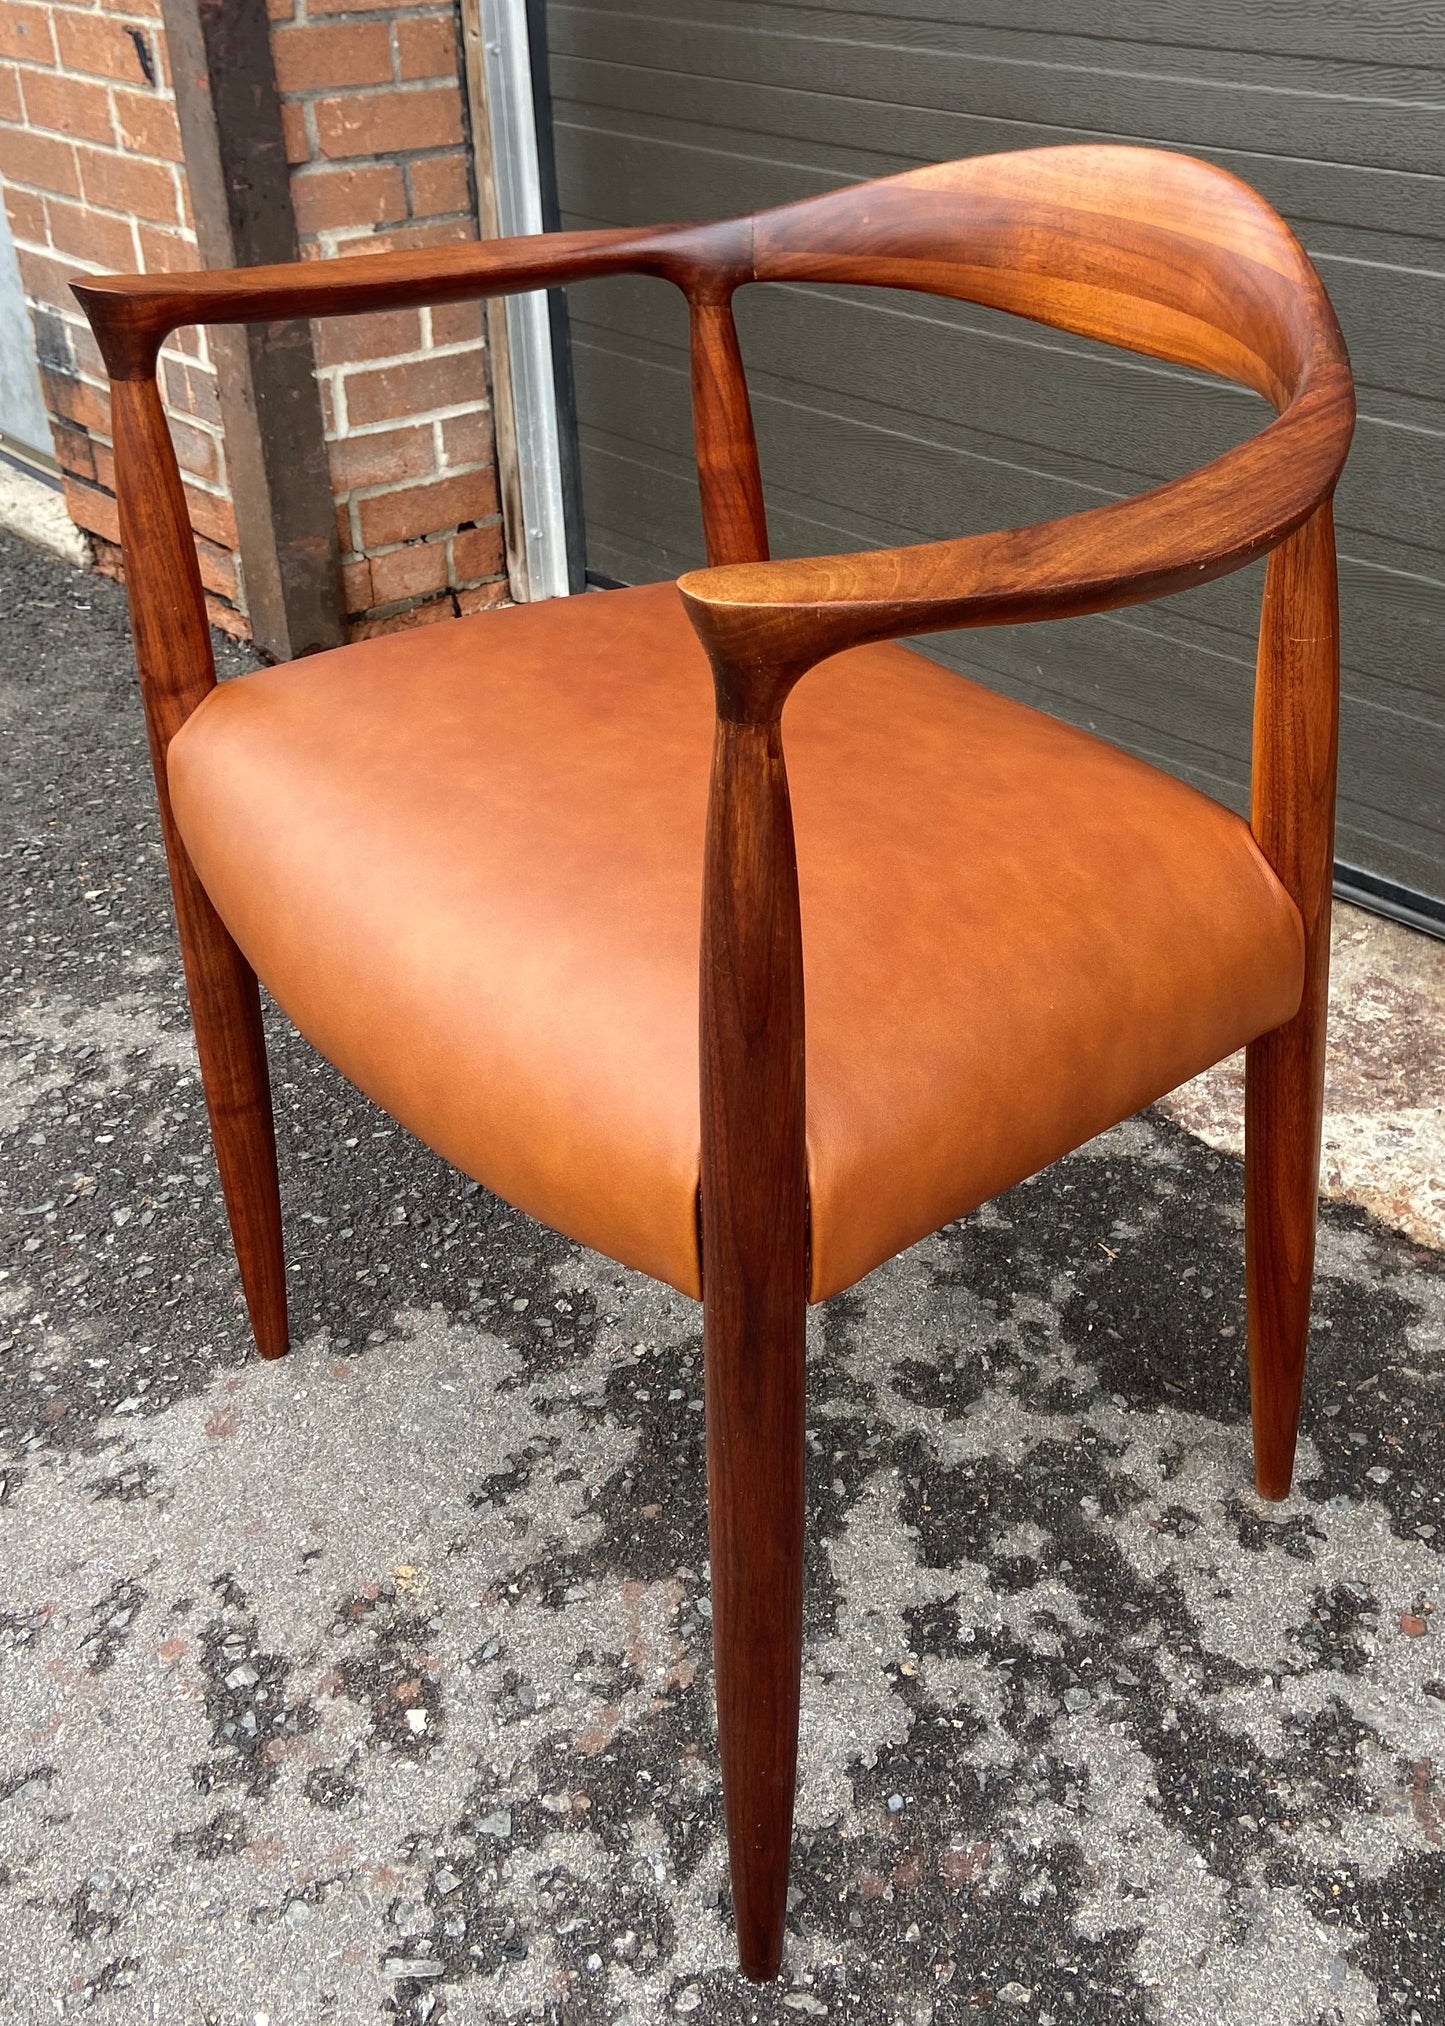 REFINISHED REUPHOLSTERED in Leather Danish Mid Century Modern Teak Armchair